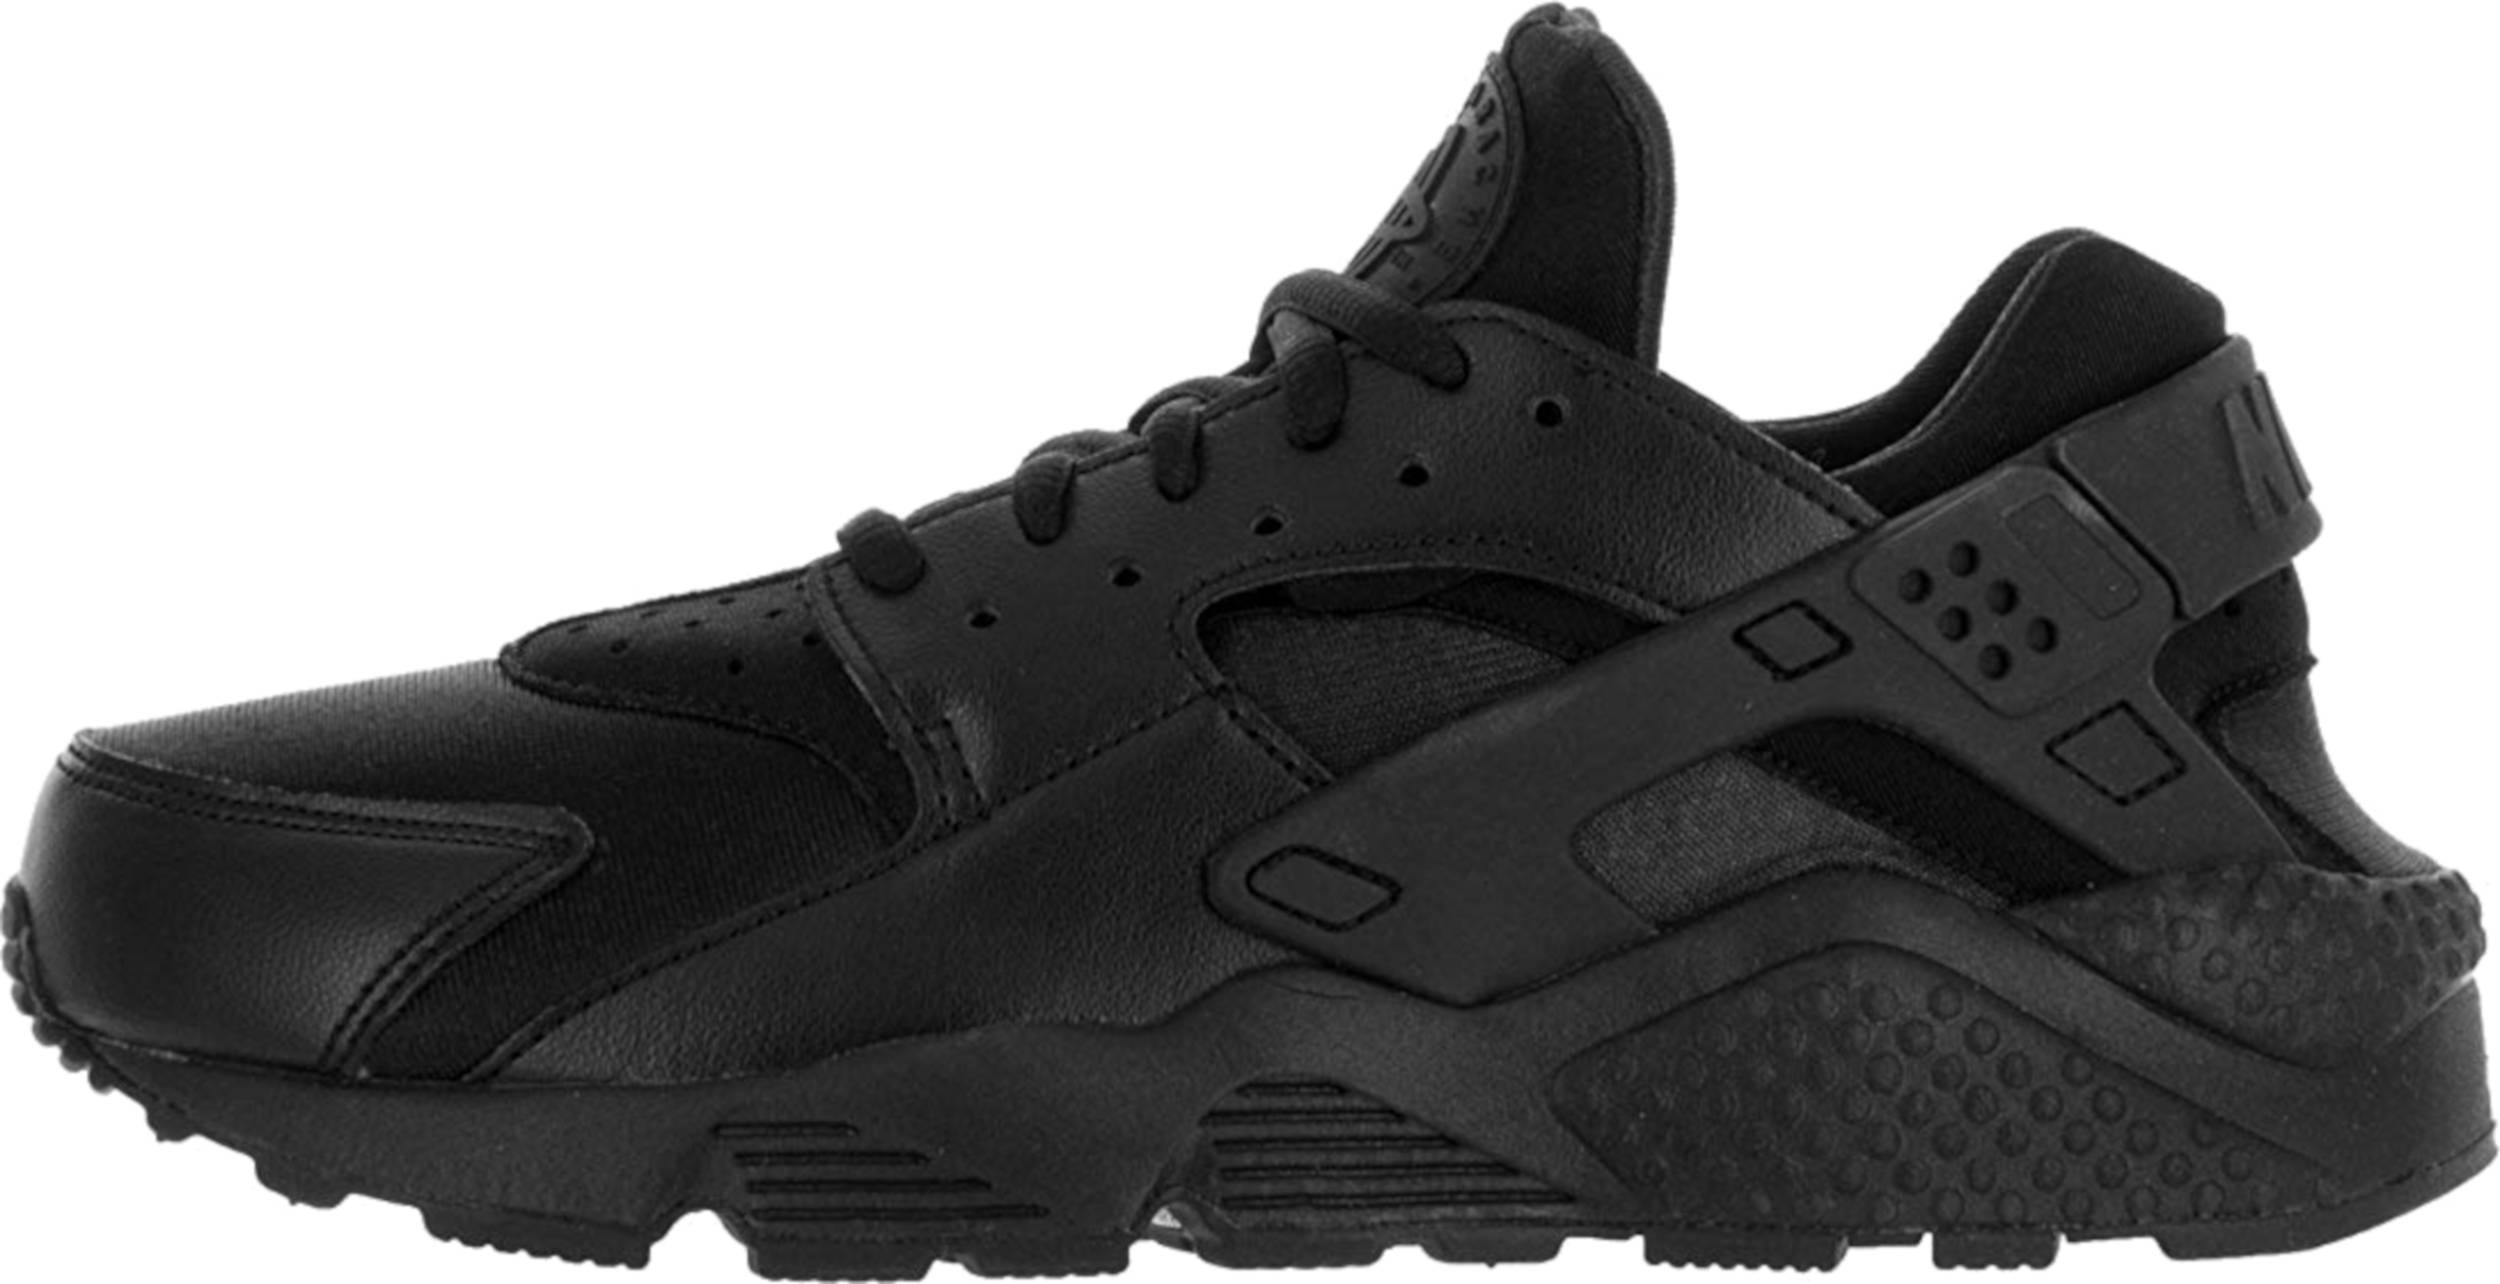 Only $85 + Review of Nike Air Huarache 